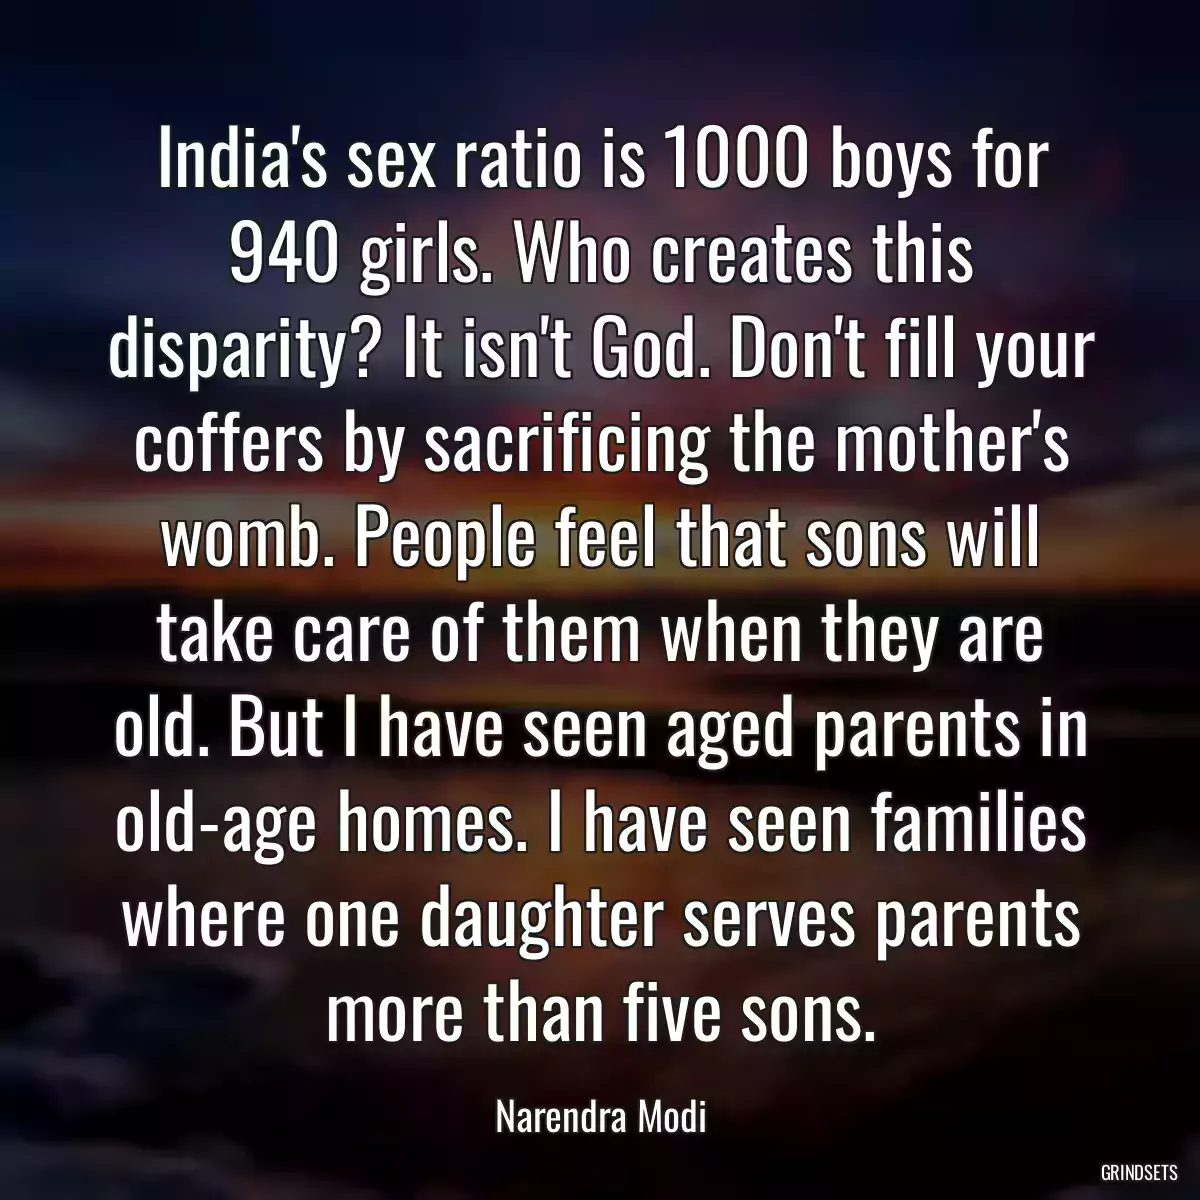 India\'s sex ratio is 1000 boys for 940 girls. Who creates this disparity? It isn\'t God. Don\'t fill your coffers by sacrificing the mother\'s womb. People feel that sons will take care of them when they are old. But I have seen aged parents in old-age homes. I have seen families where one daughter serves parents more than five sons.